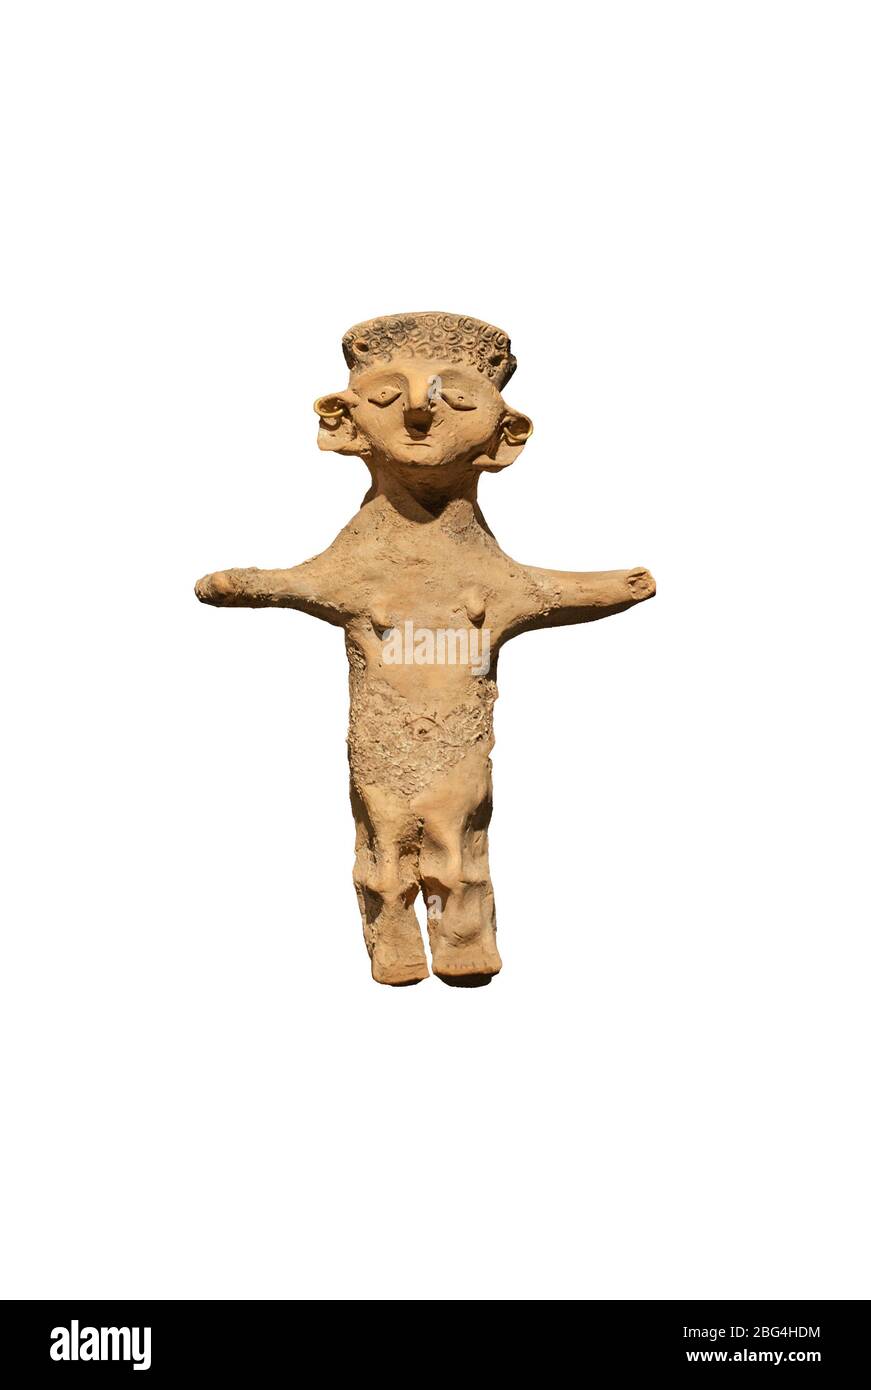 Barcelona, Spain - Dec 27th, 2019: Terracotta statuette of carthaginian Goddess. 4th century BC, Puig des Molins, Ibiza. Catalan Museum of Archaeology Stock Photo